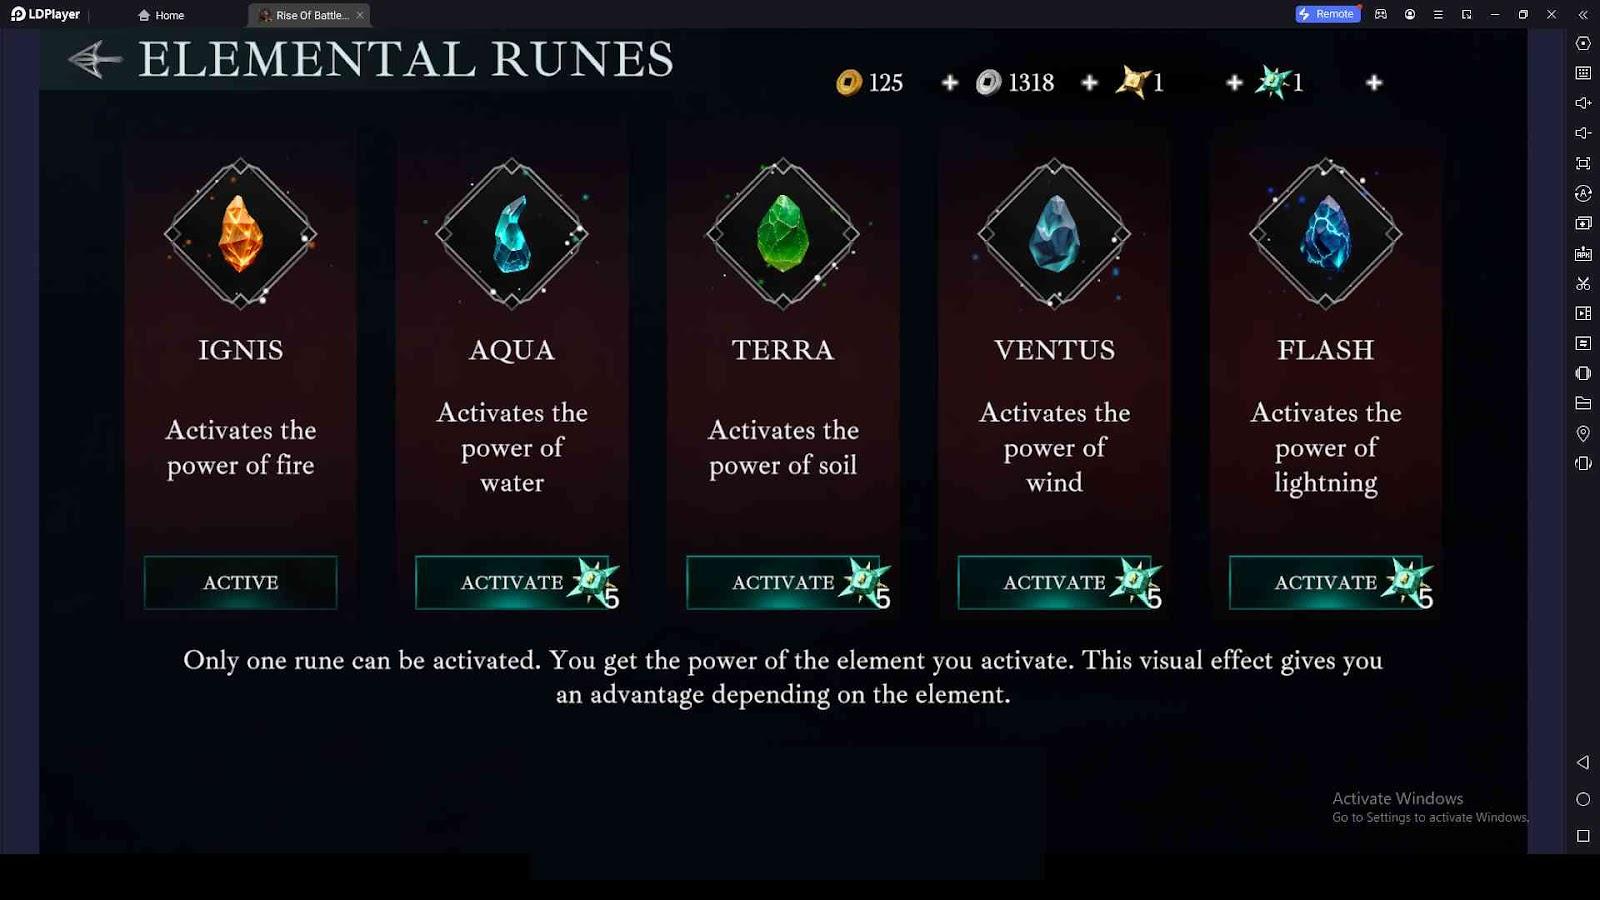 What are the Types of Elemental Runes